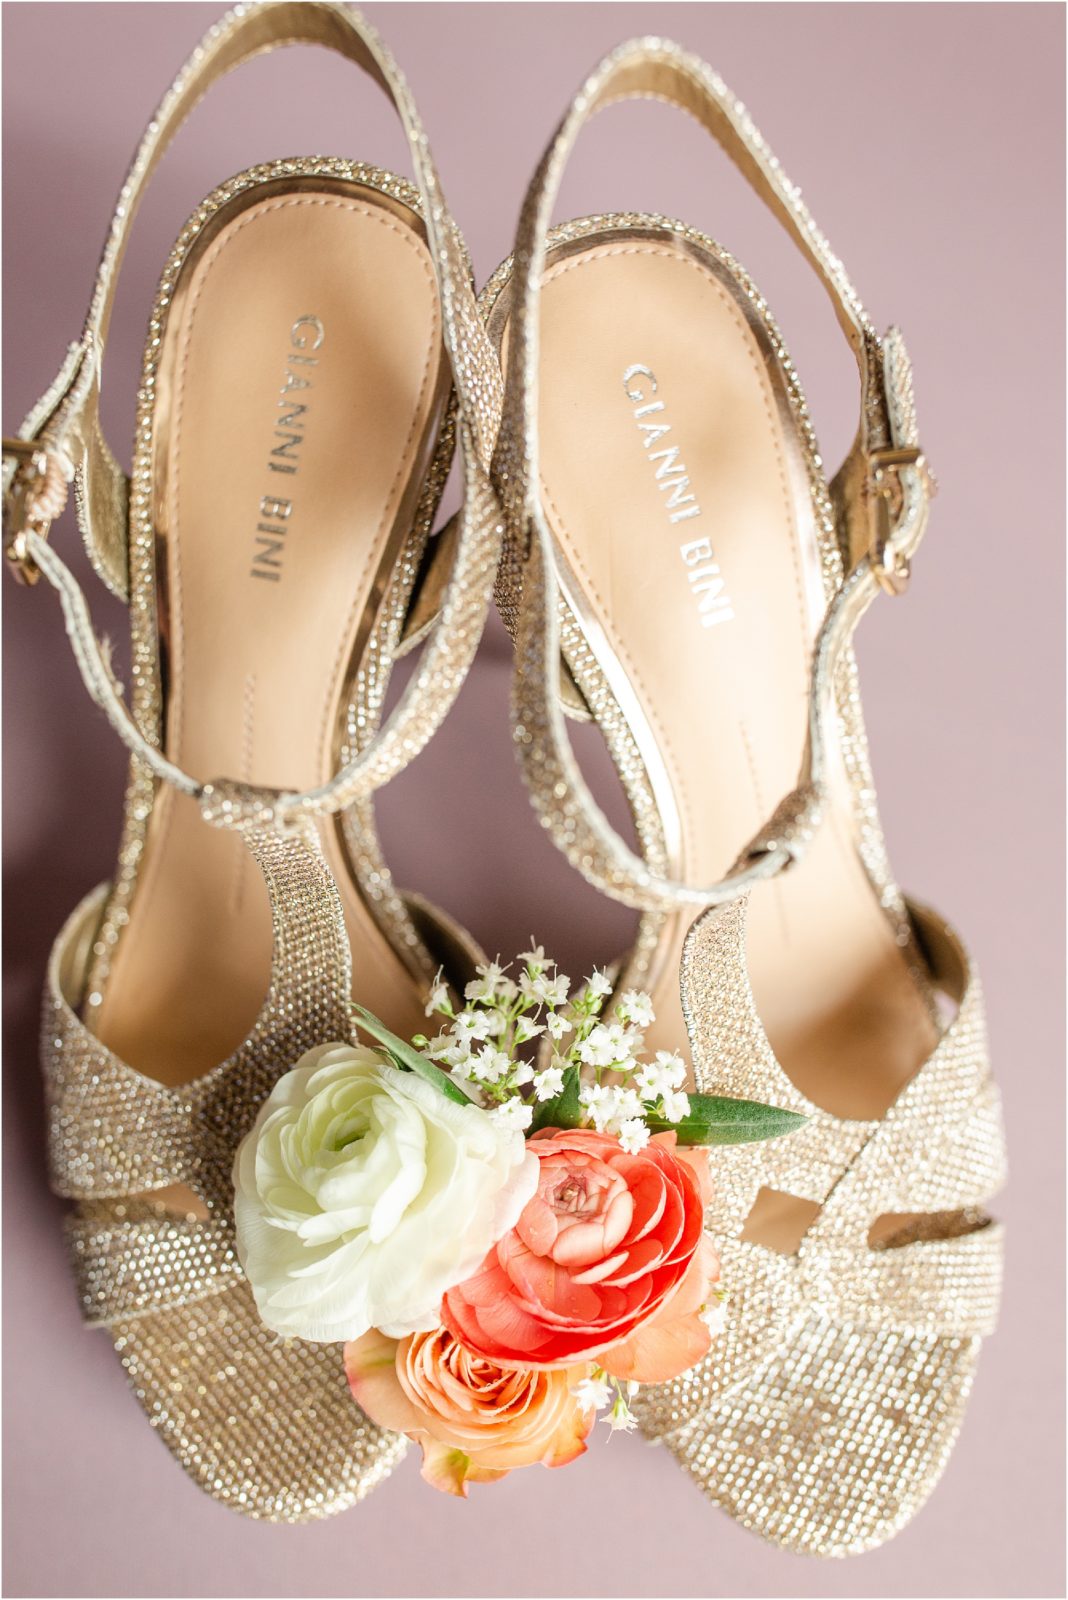 Bride's shoes and flower